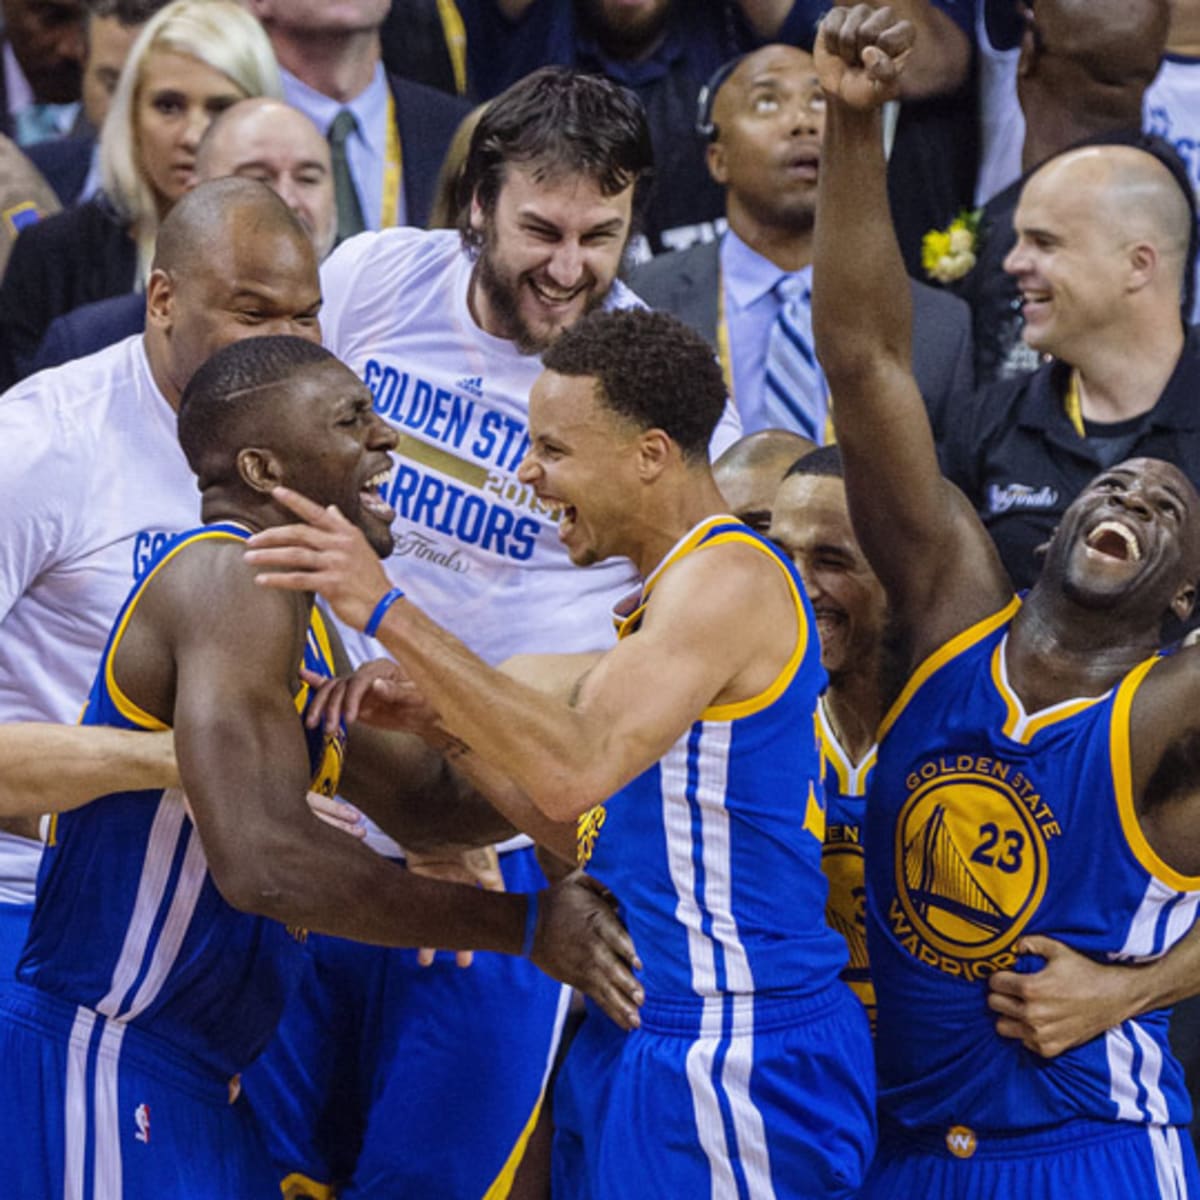 Golden State Warriors beat LeBron James, Cavs in Game 6 to take